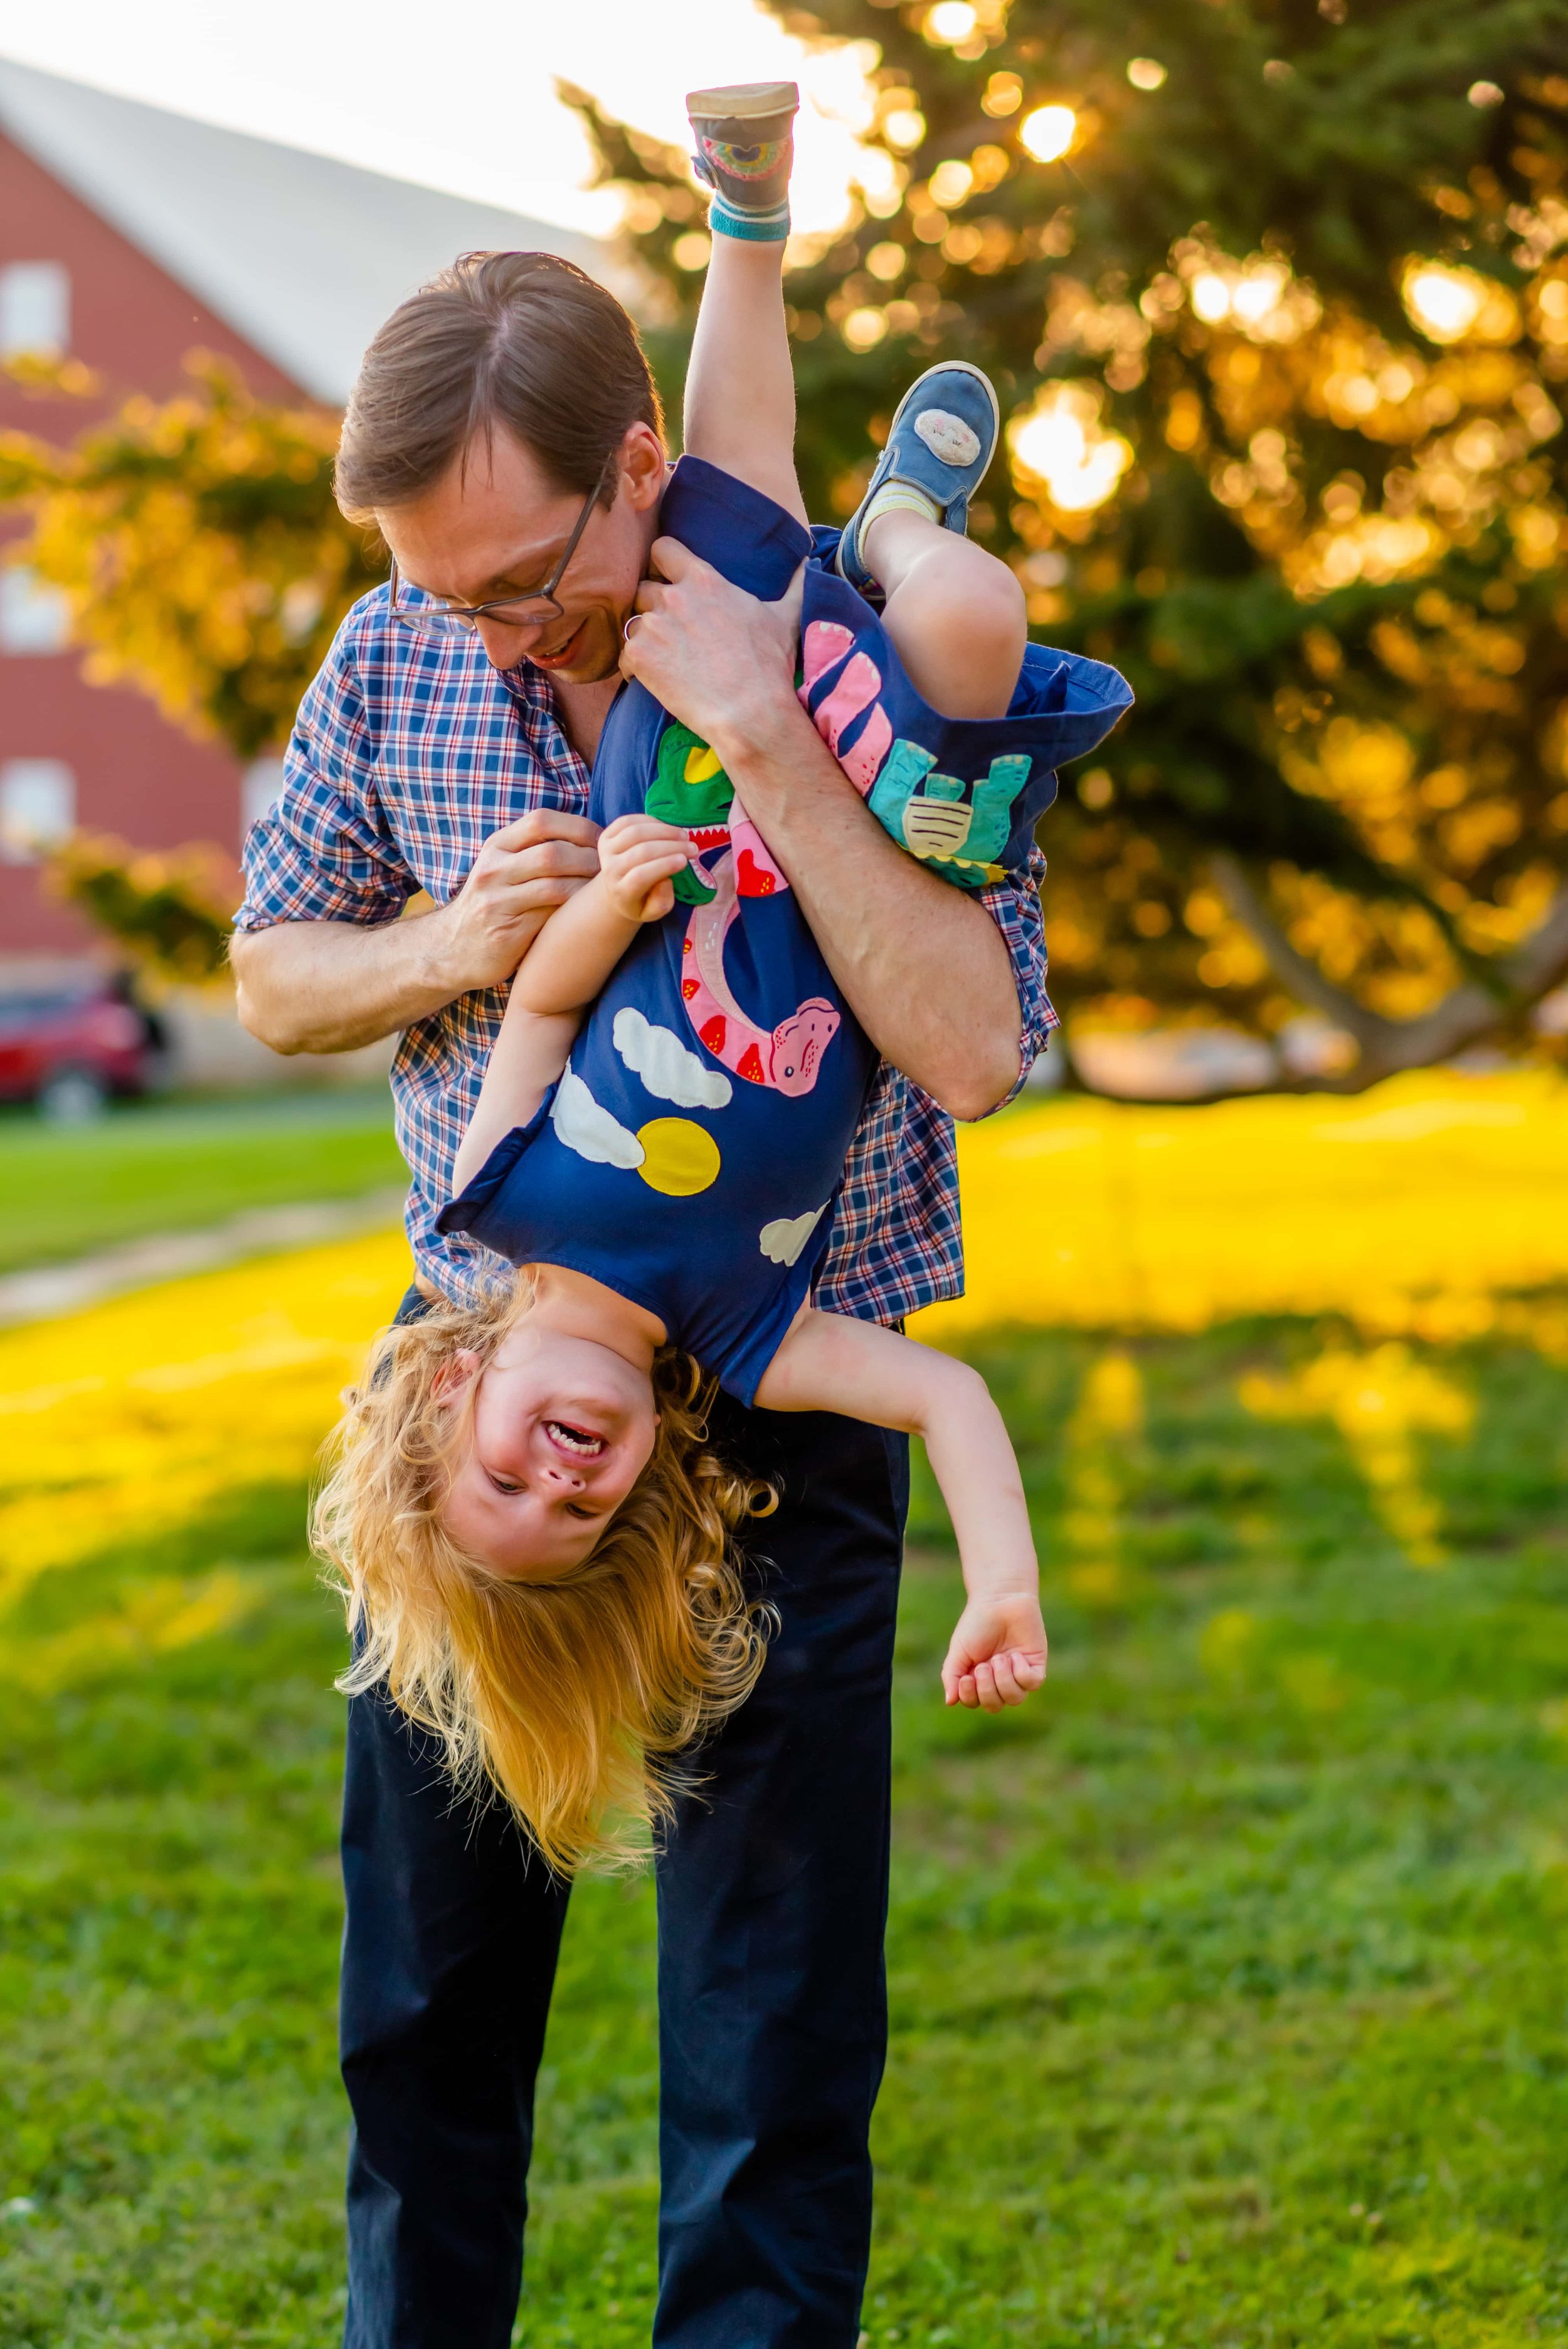 Summer family photo of dad holding daughter upside down